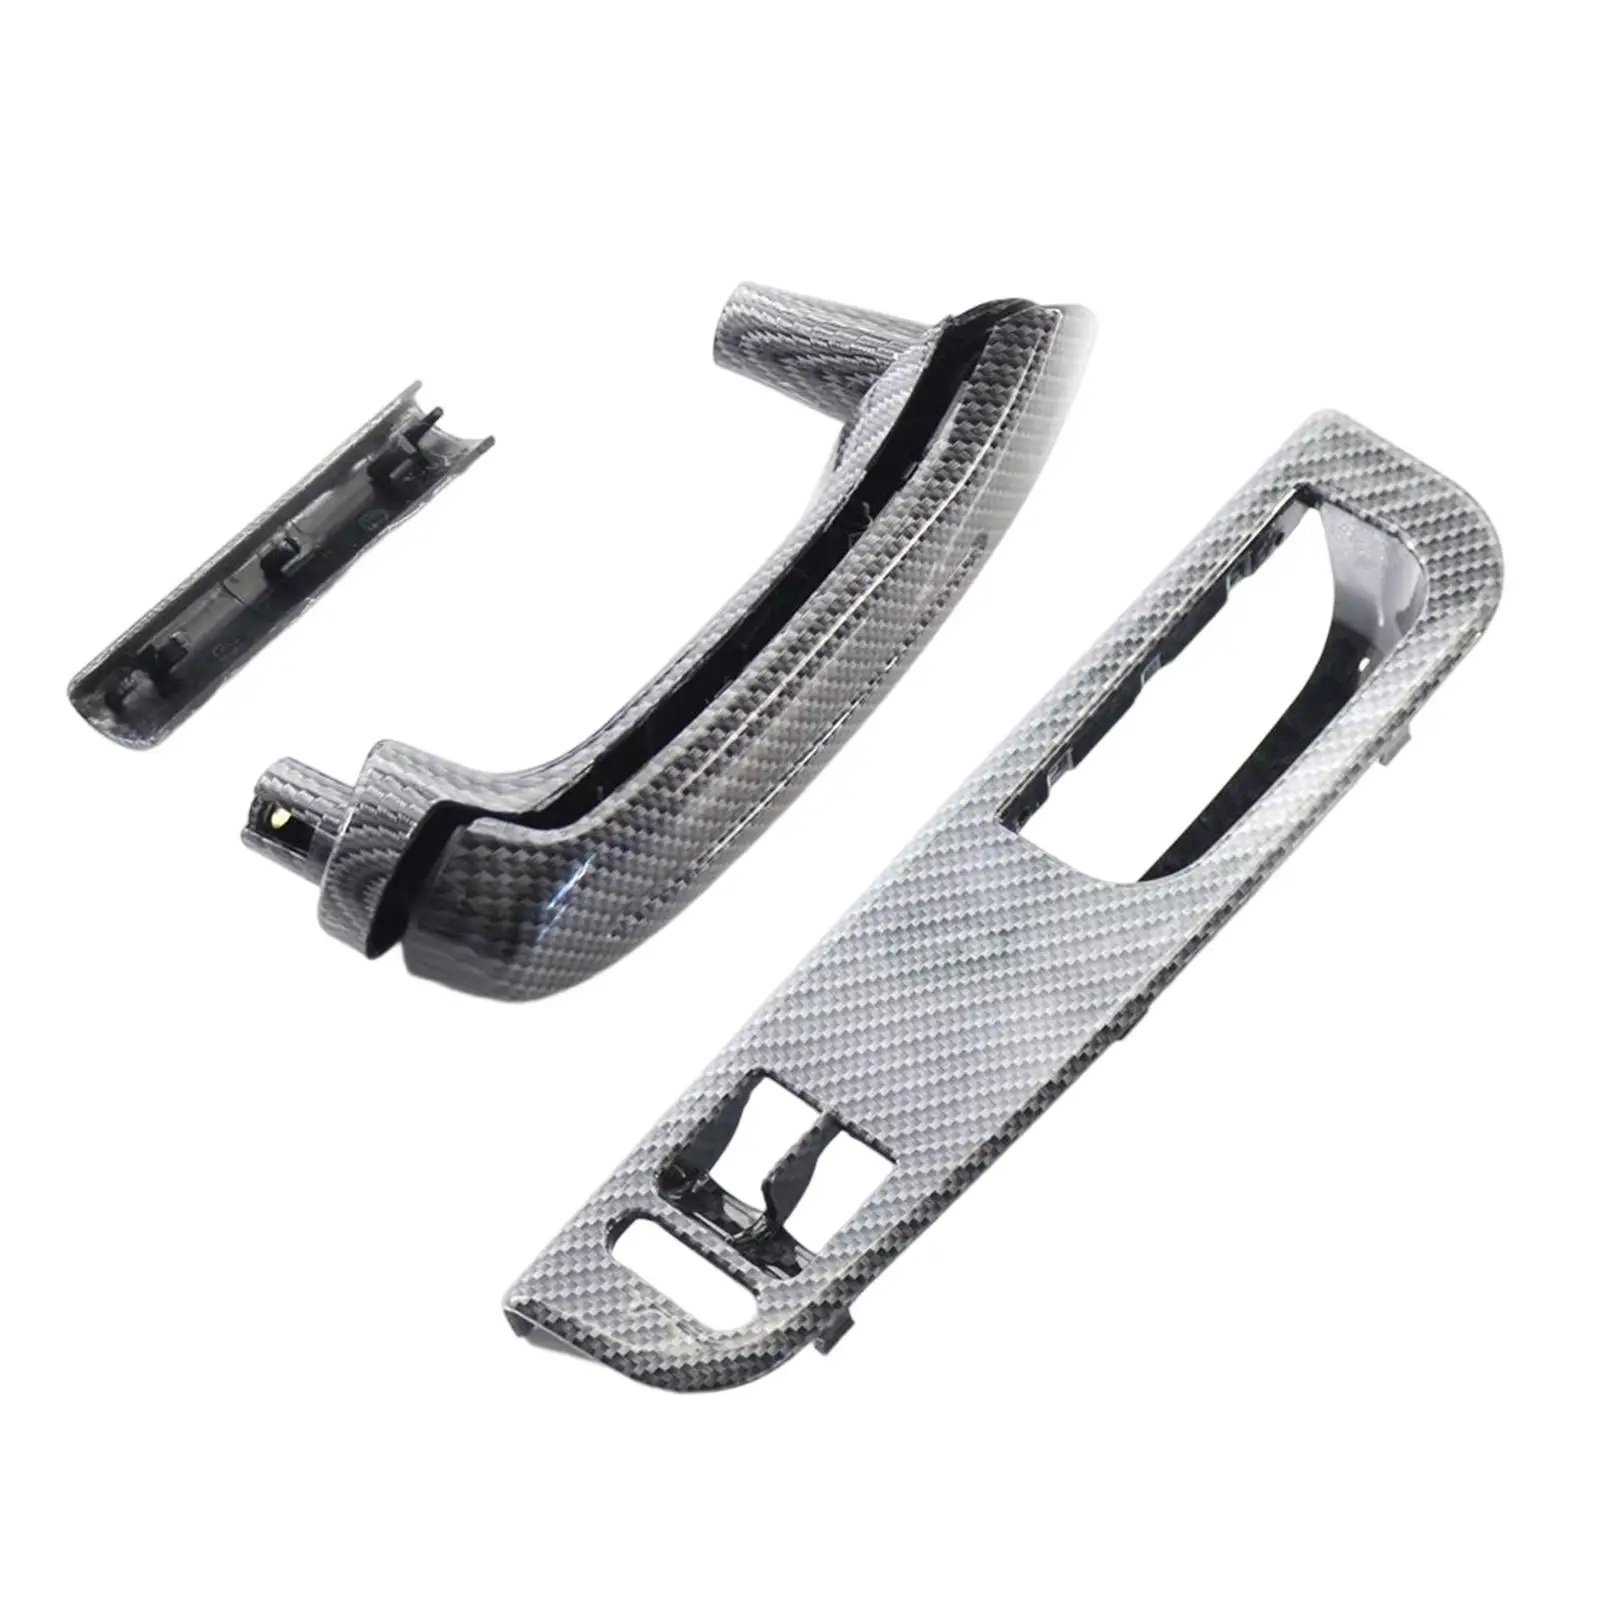 Interior Grab Handle Cover Set for Golf MK4 2 Doors Easier to Install